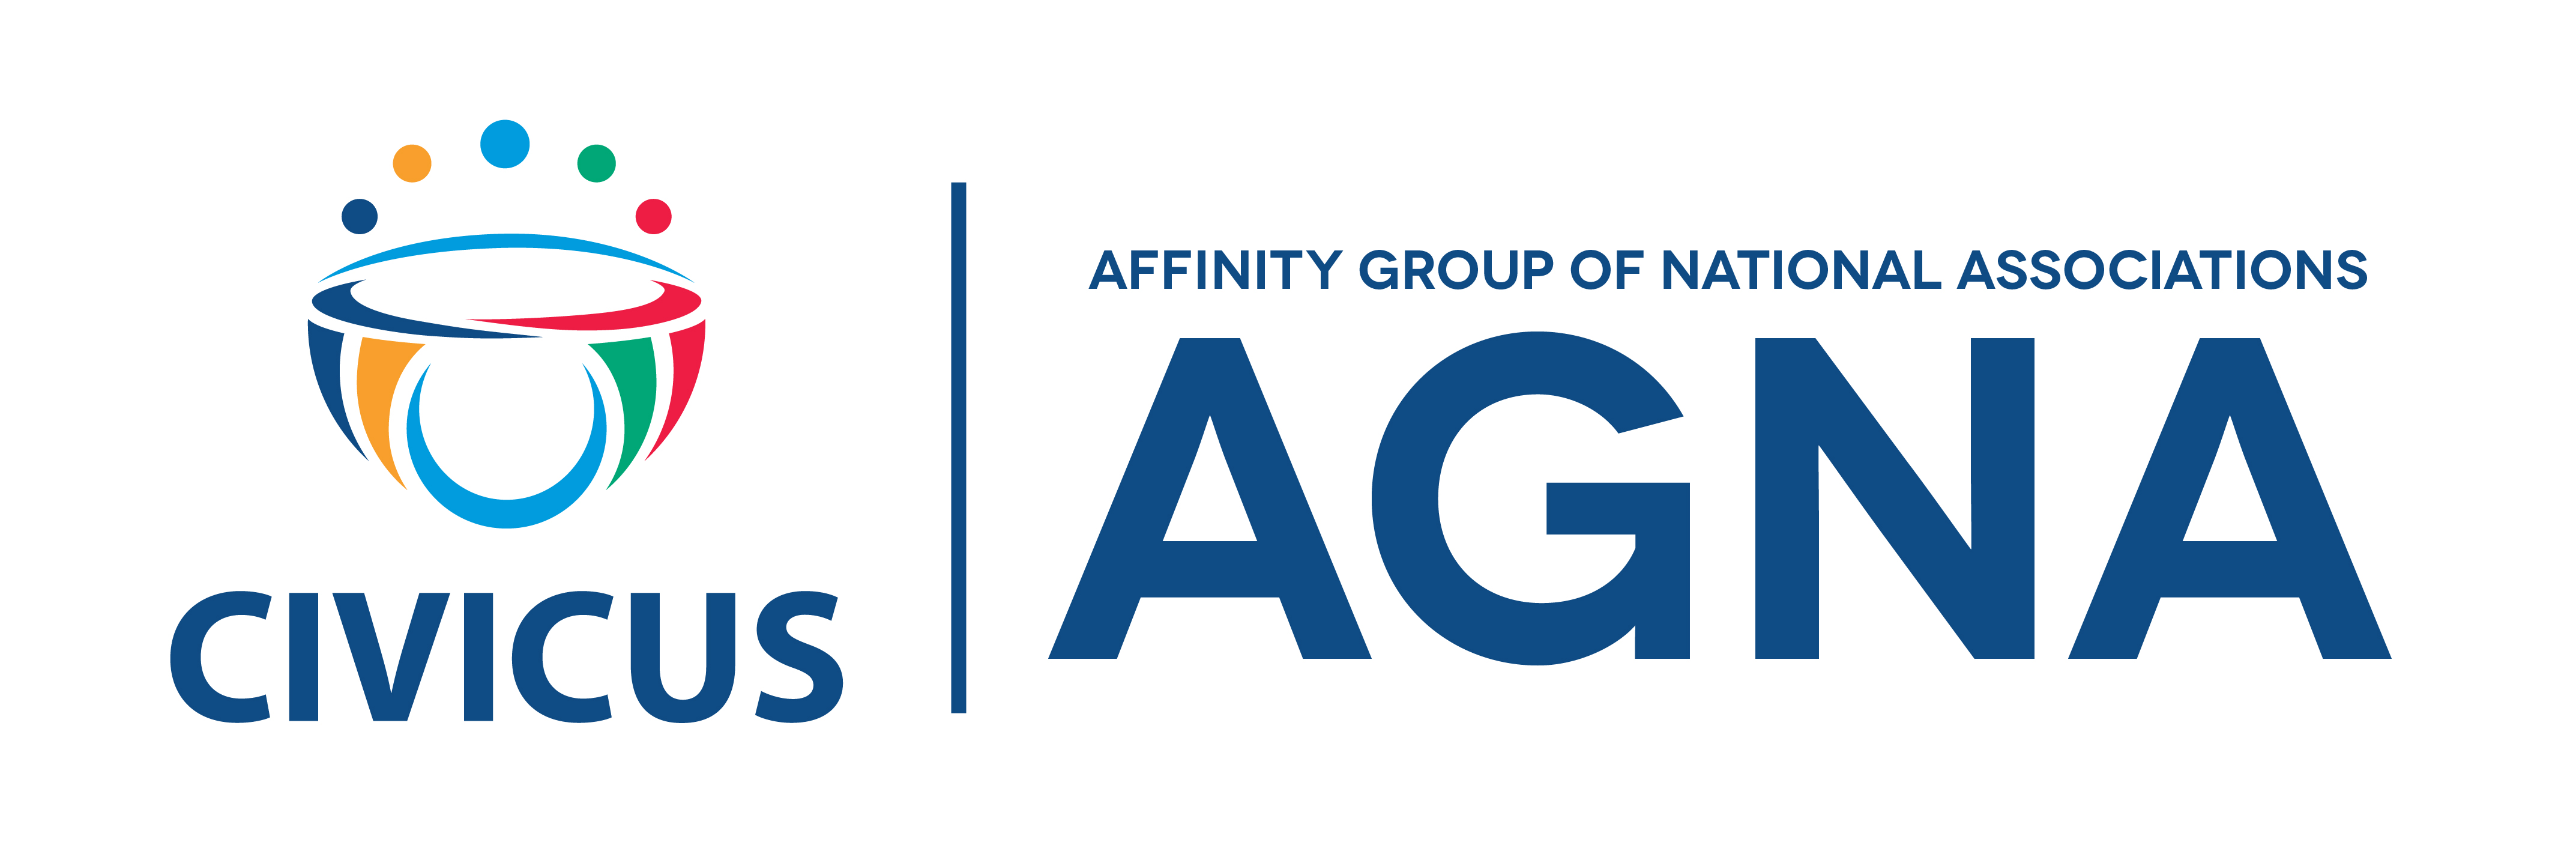 APPLICATION FORM AFFINNITY GROUP OF NATIONAL ASSOCIATIONS 1 PLEASE